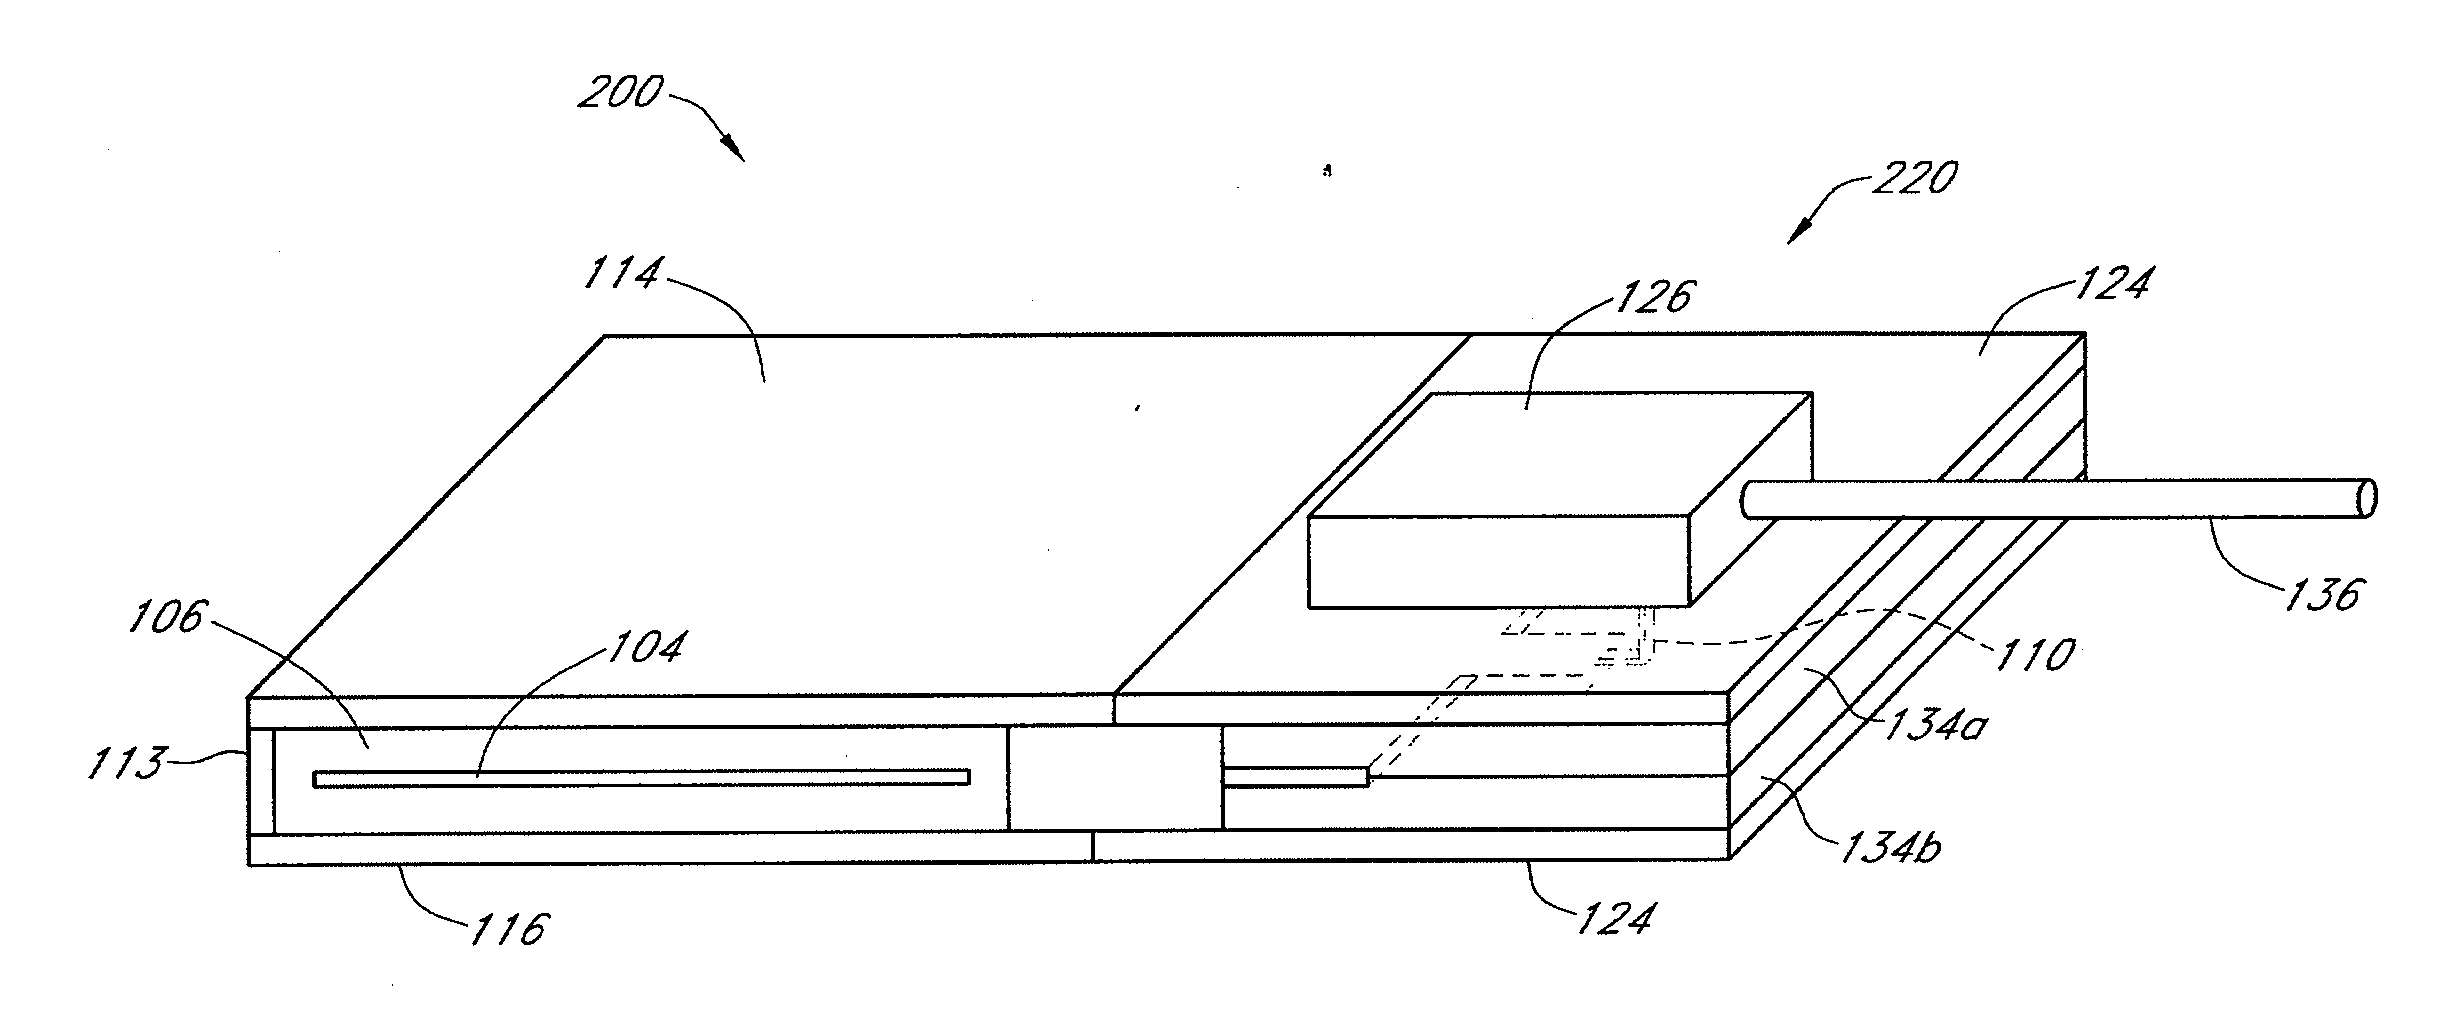 Junction box attachment for photovoltaic thin film devices